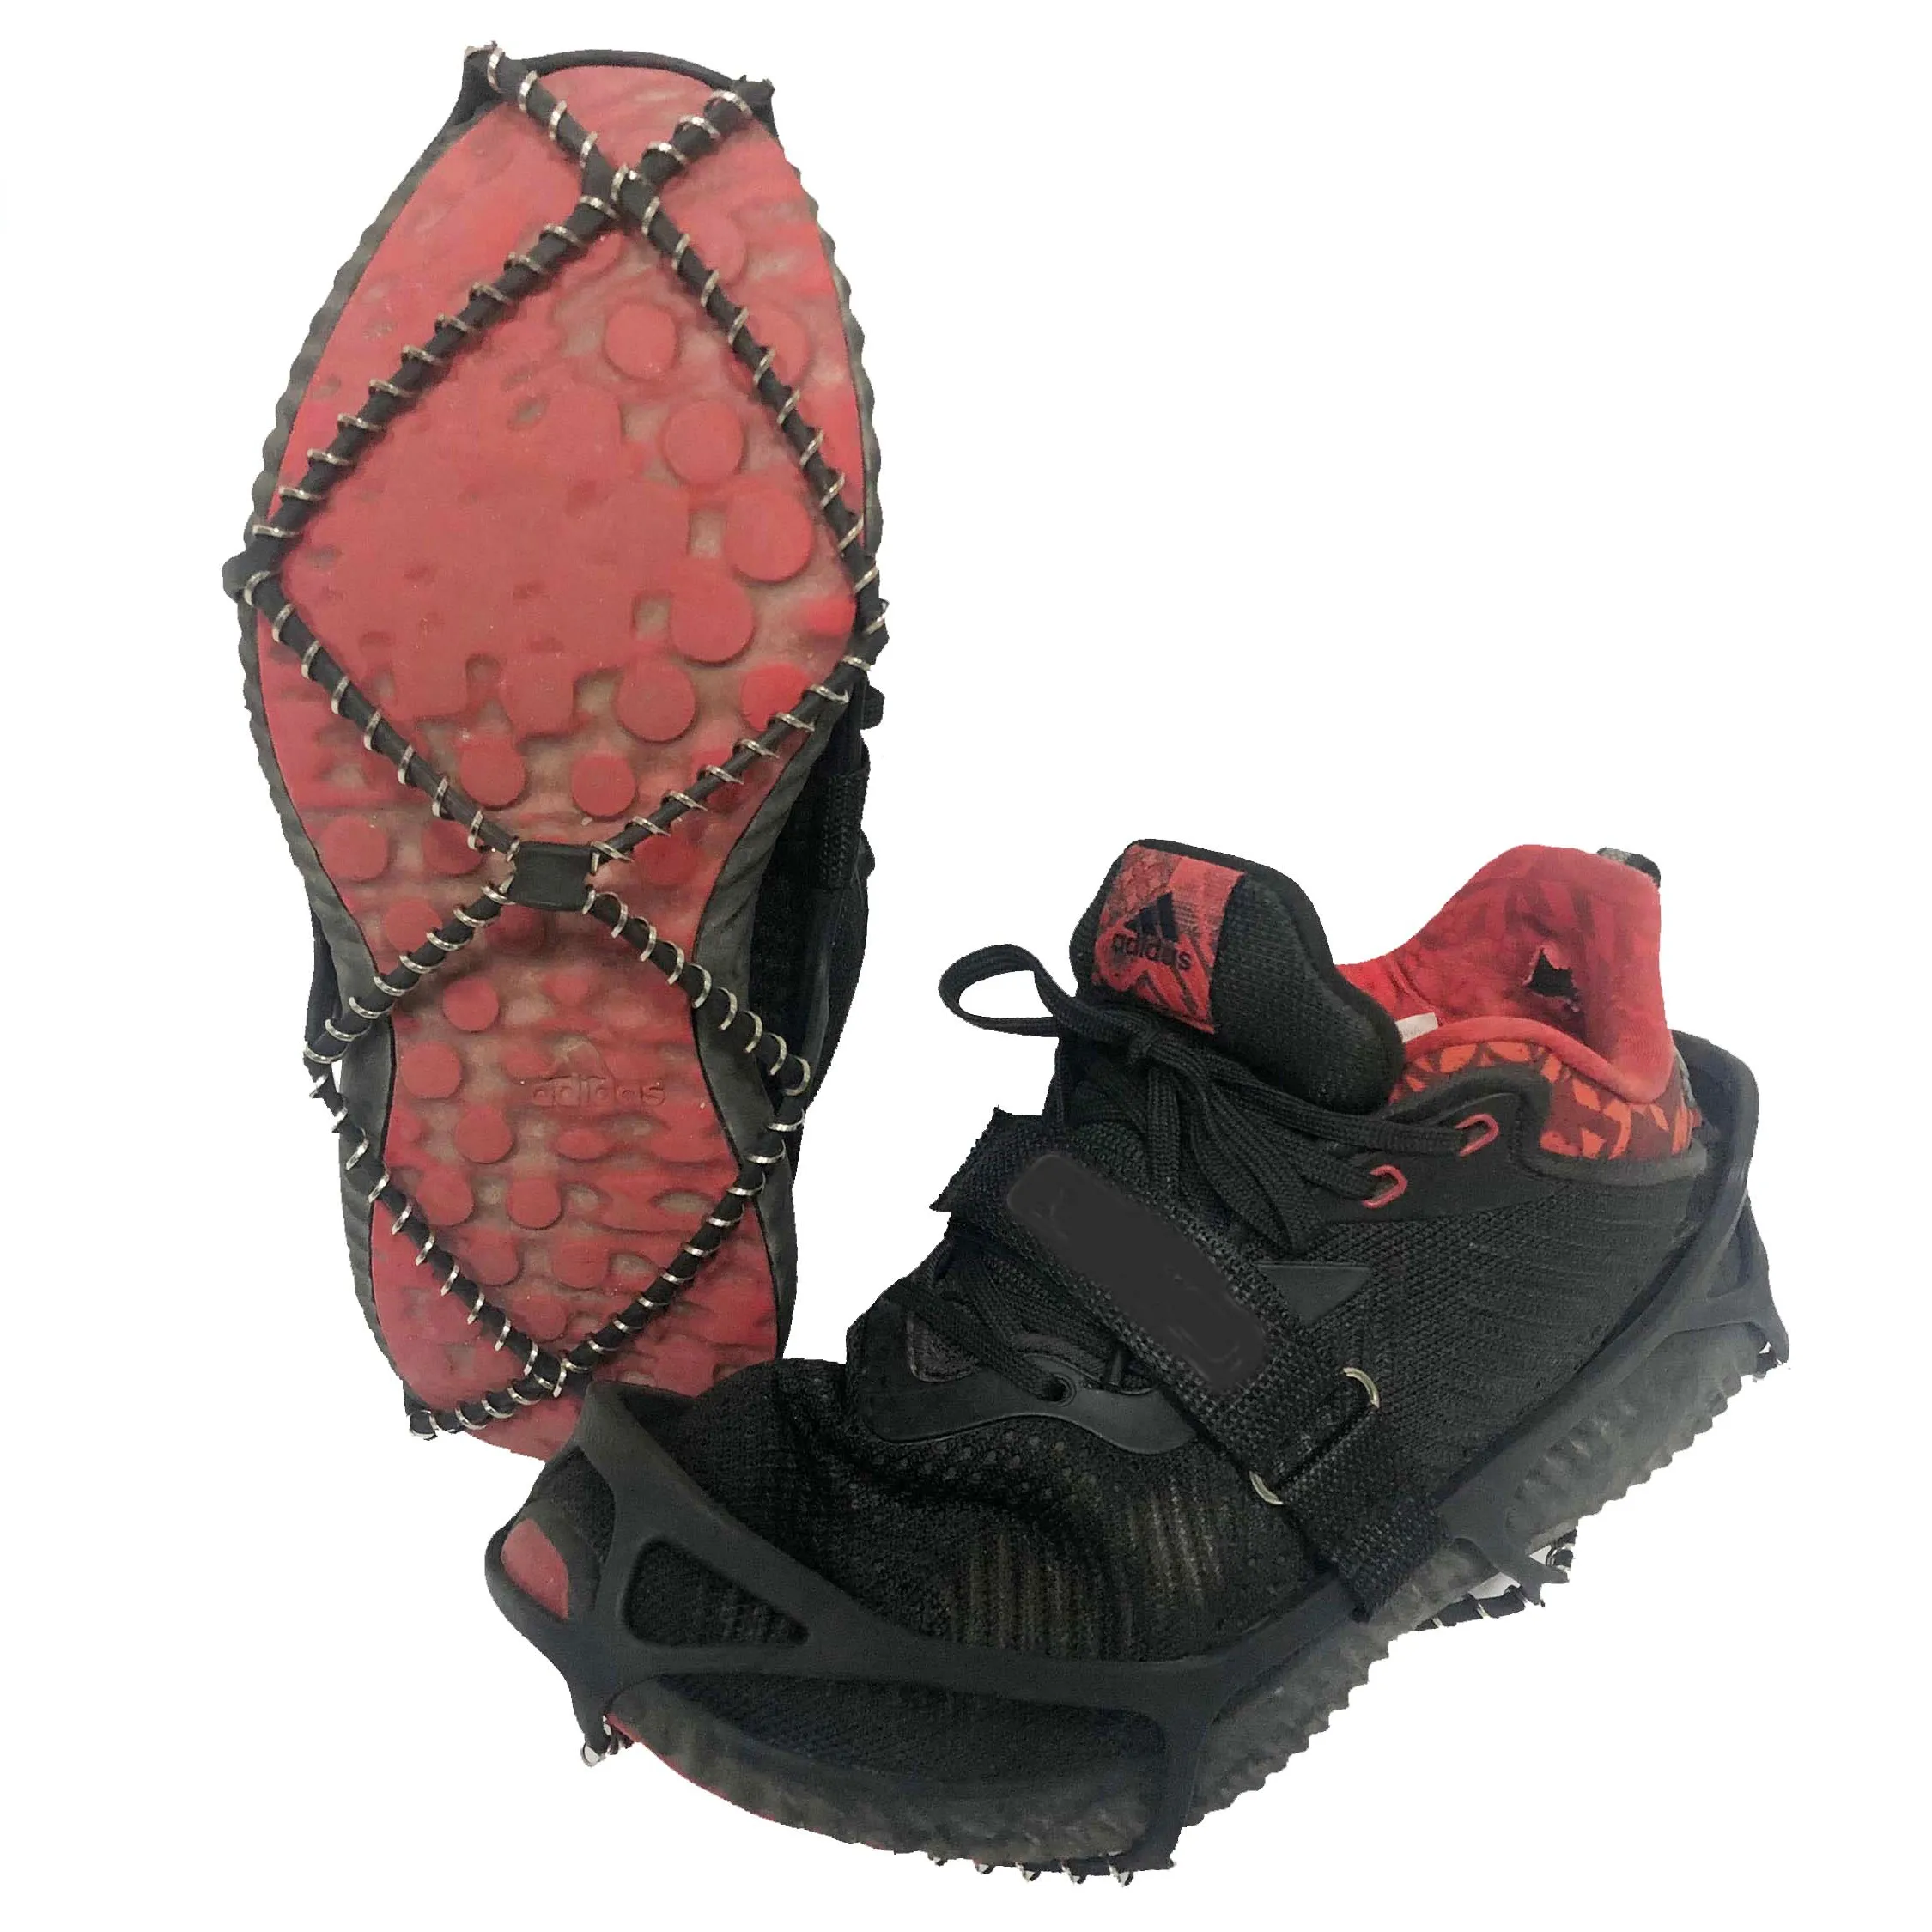 Long Distance Mens Running Spikes Shoes Kick Spike Snow Boots Ice Spikes Tures Studs In China